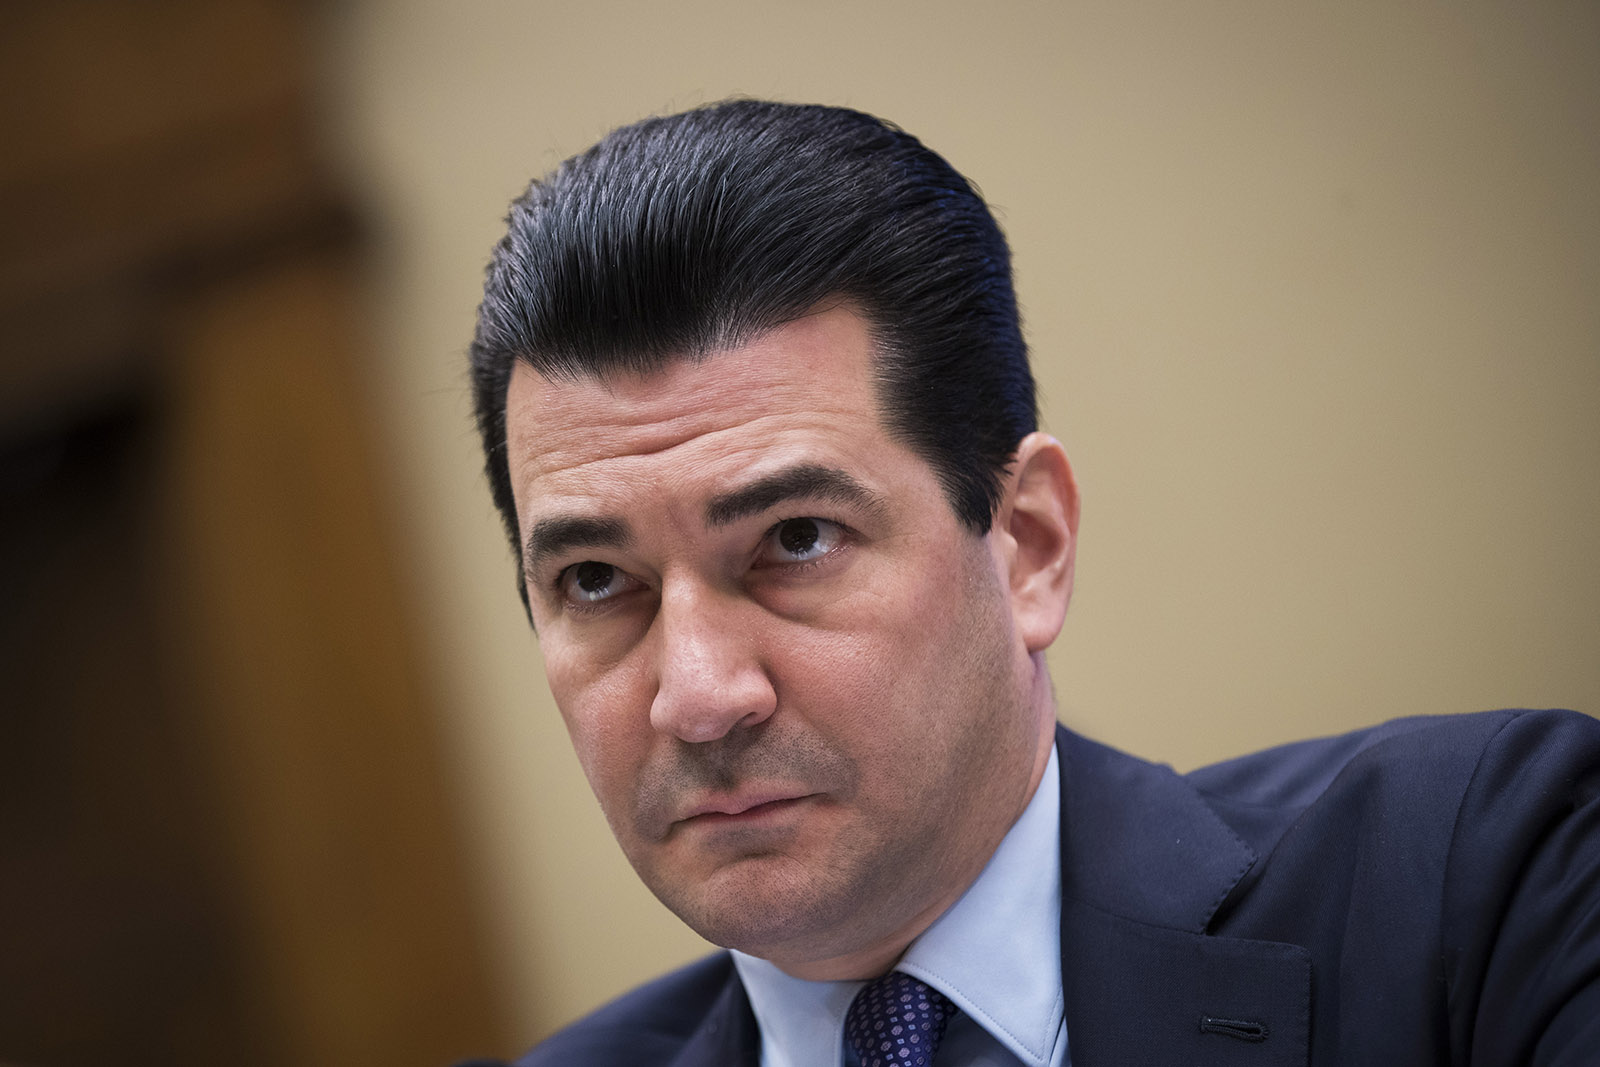 Dr. Scott Gottlieb, commissioner of the Food and Drug Administration, testifies during a House Energy and Commerce Committee hearing concerning federal efforts to combat the opioid crisis on October 25, 2017 in Washington.